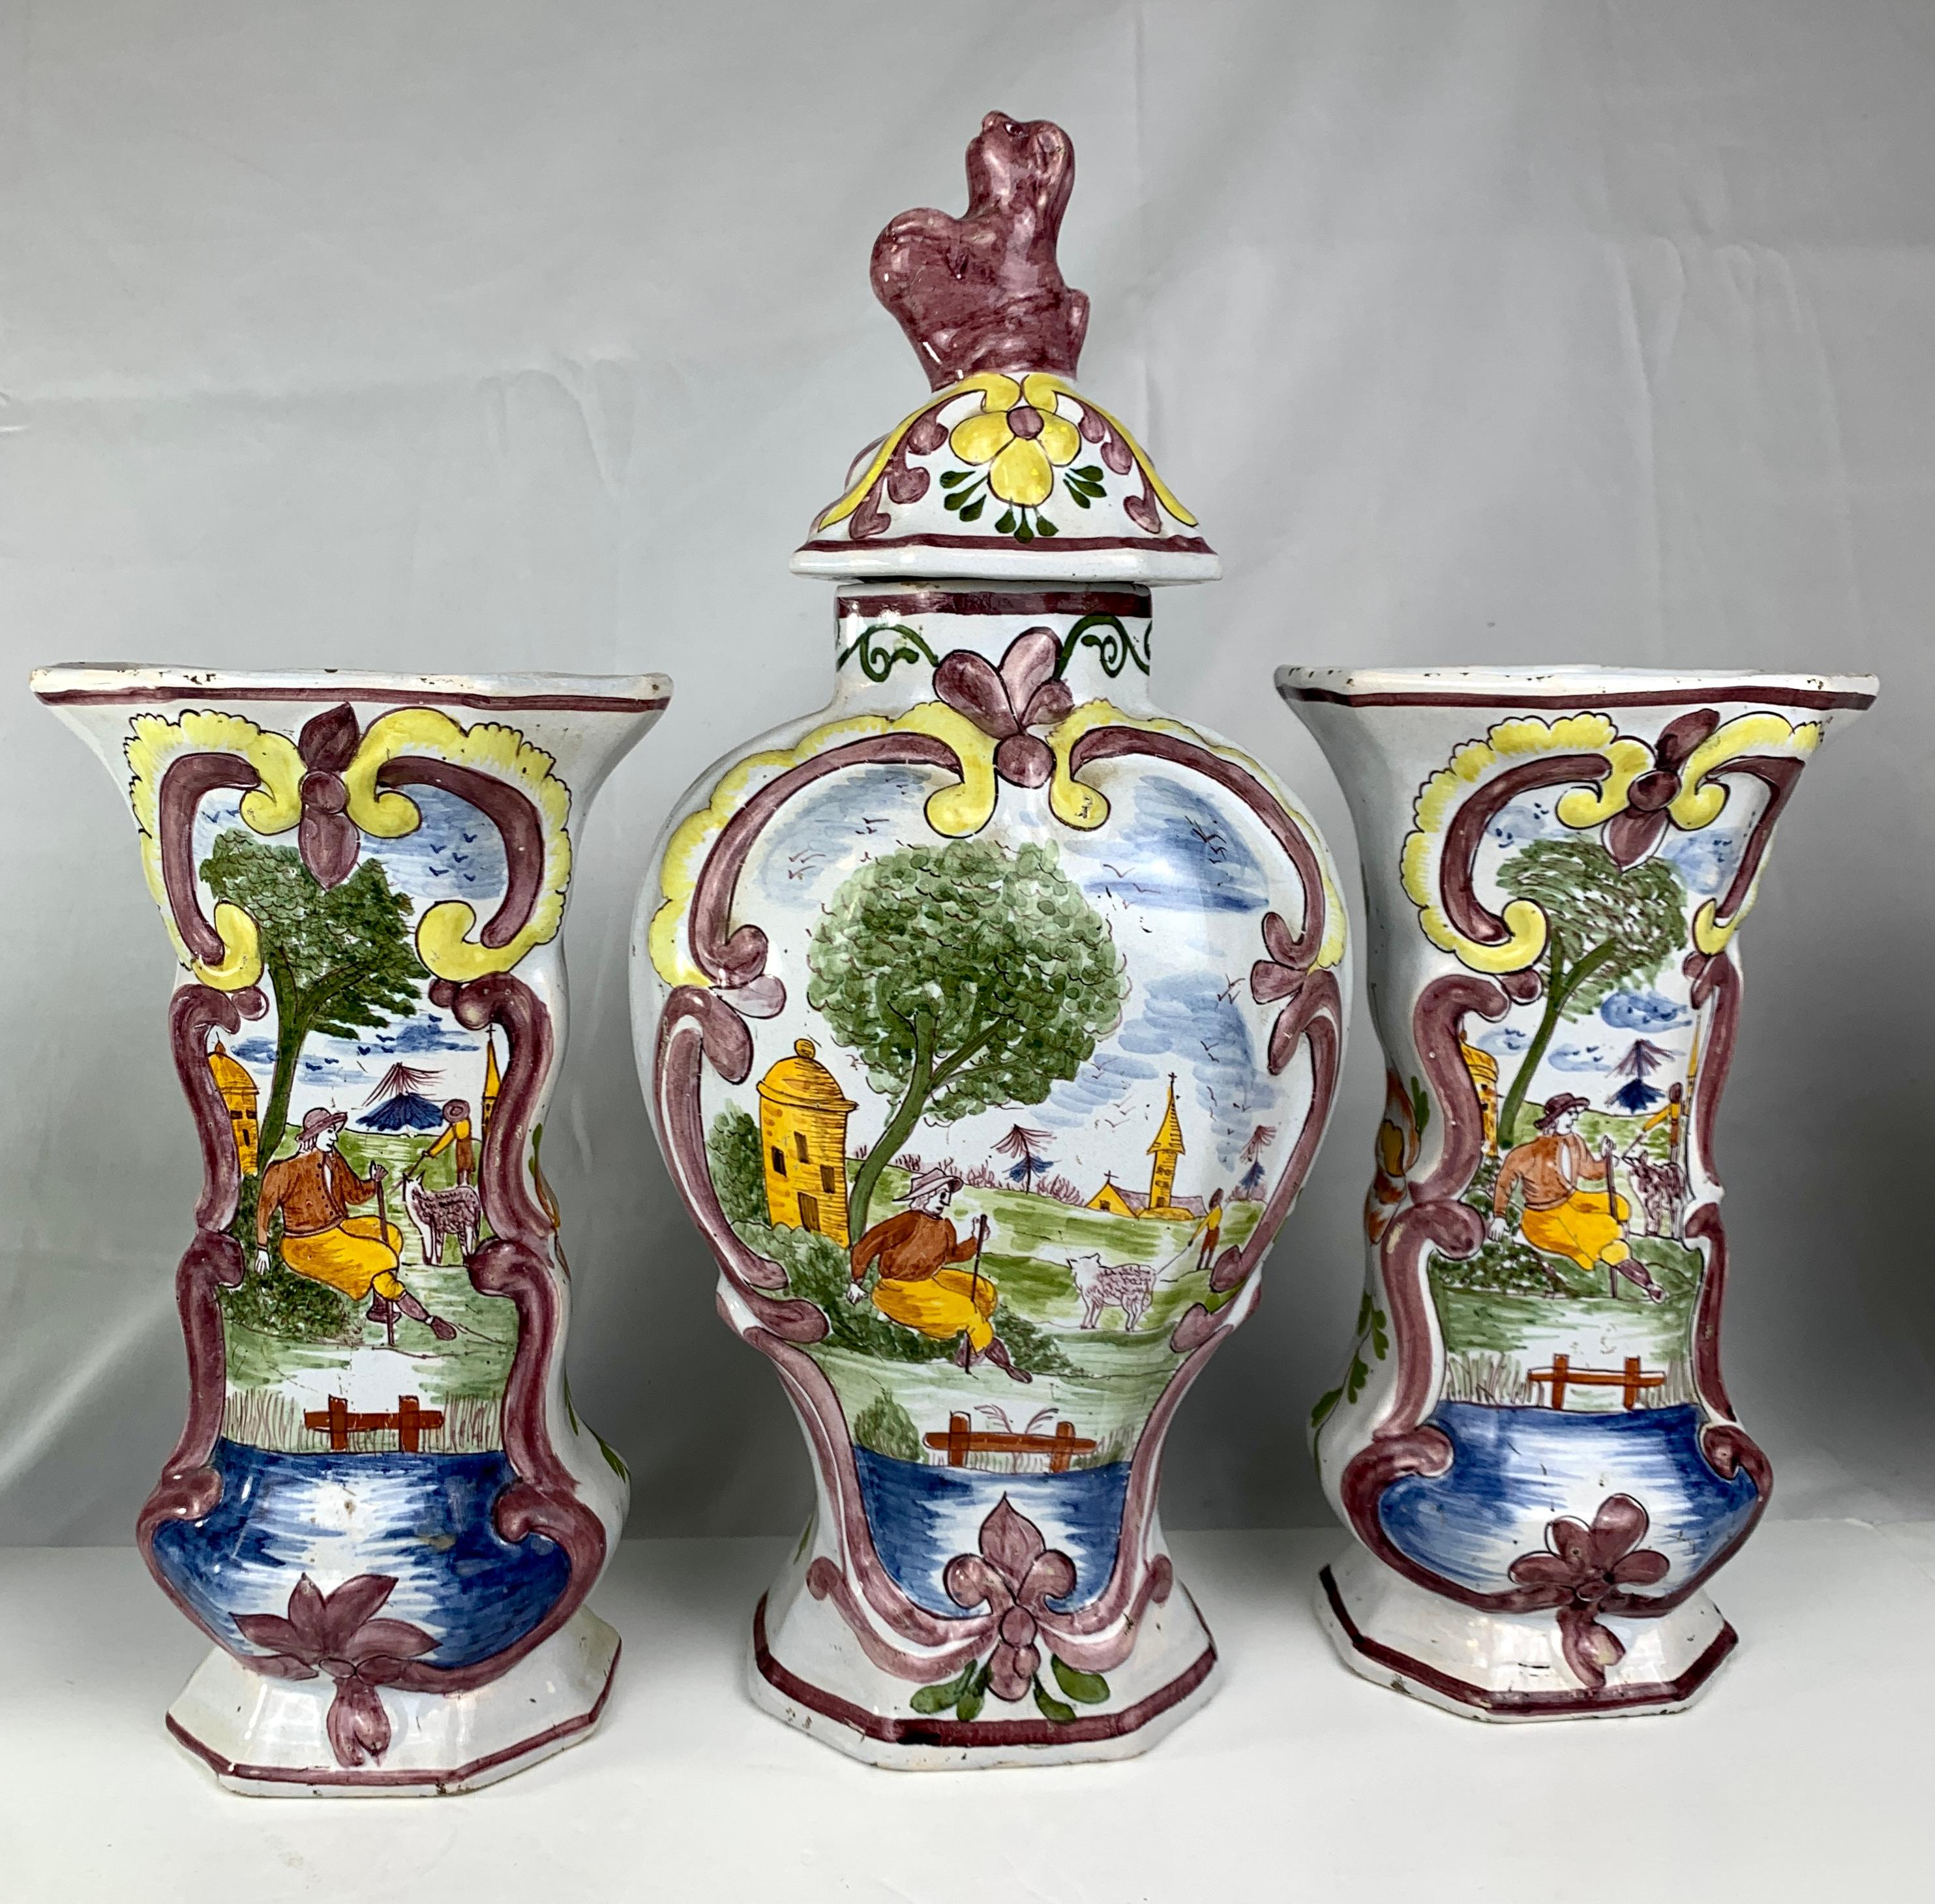 This charming Dutch Delft garniture comprises the traditional five pieces: two beaker vases and three baluster-form jars with their covers.
It is in excellent condition.
We see a romantic countryside scene with a shepherdess and sheep.
Sitting